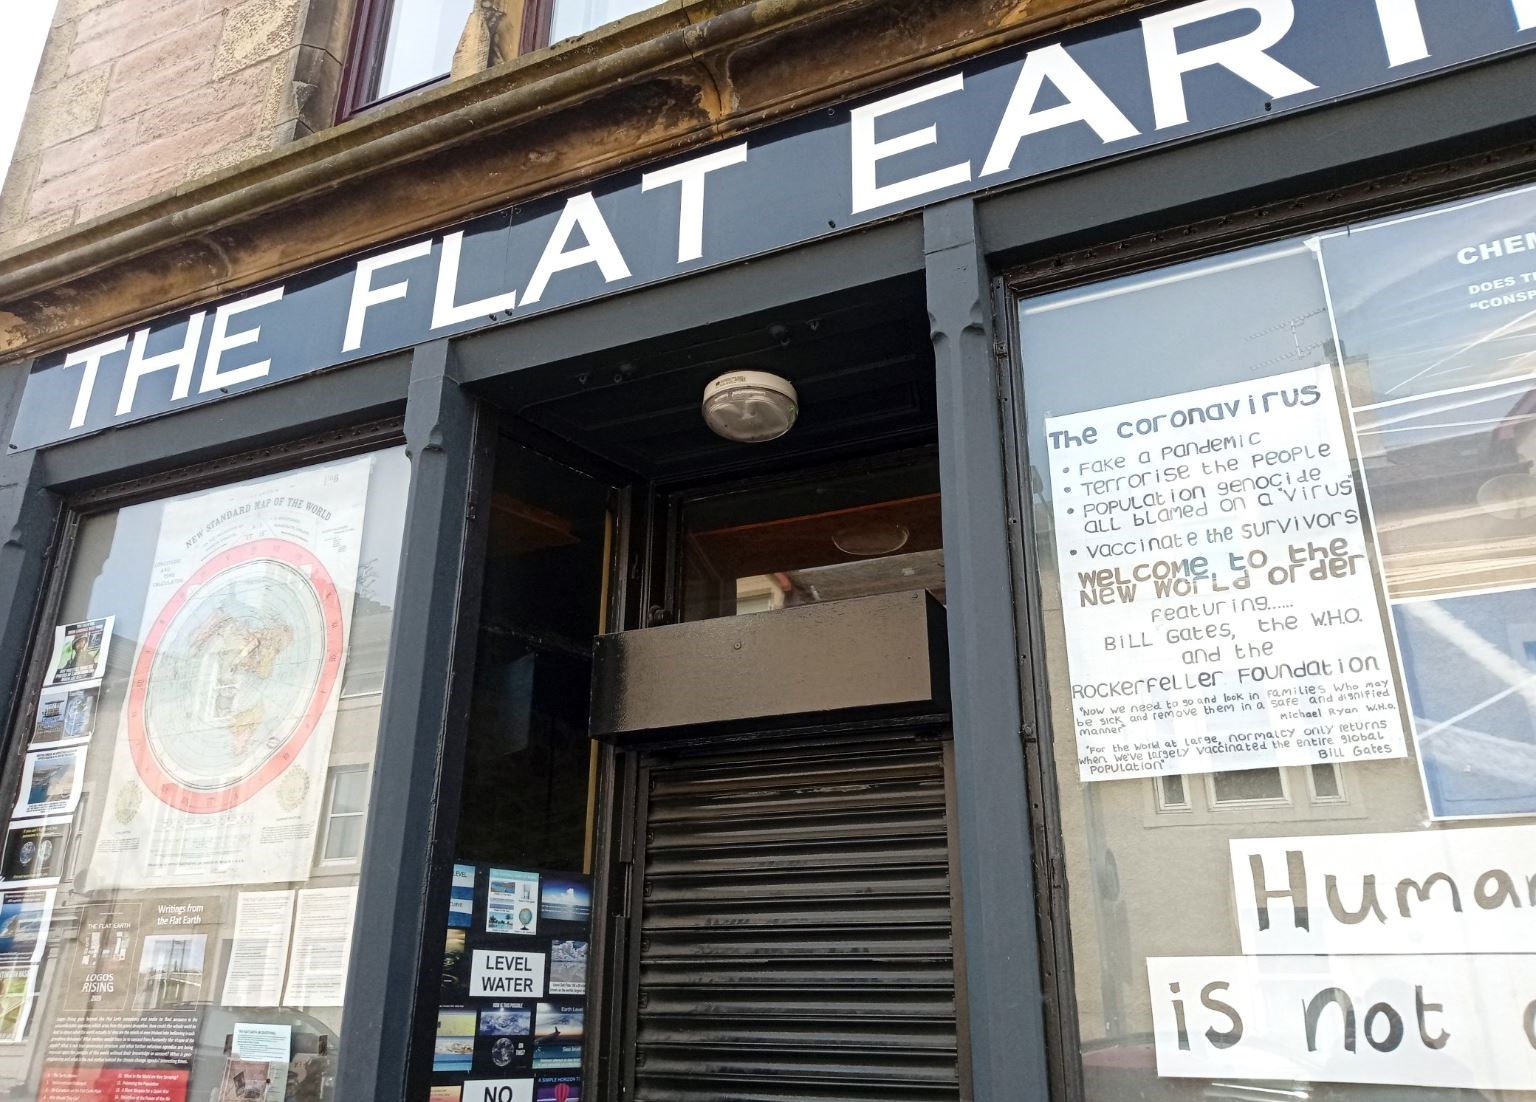 The notice in the Flat Earth window in Greig Street.